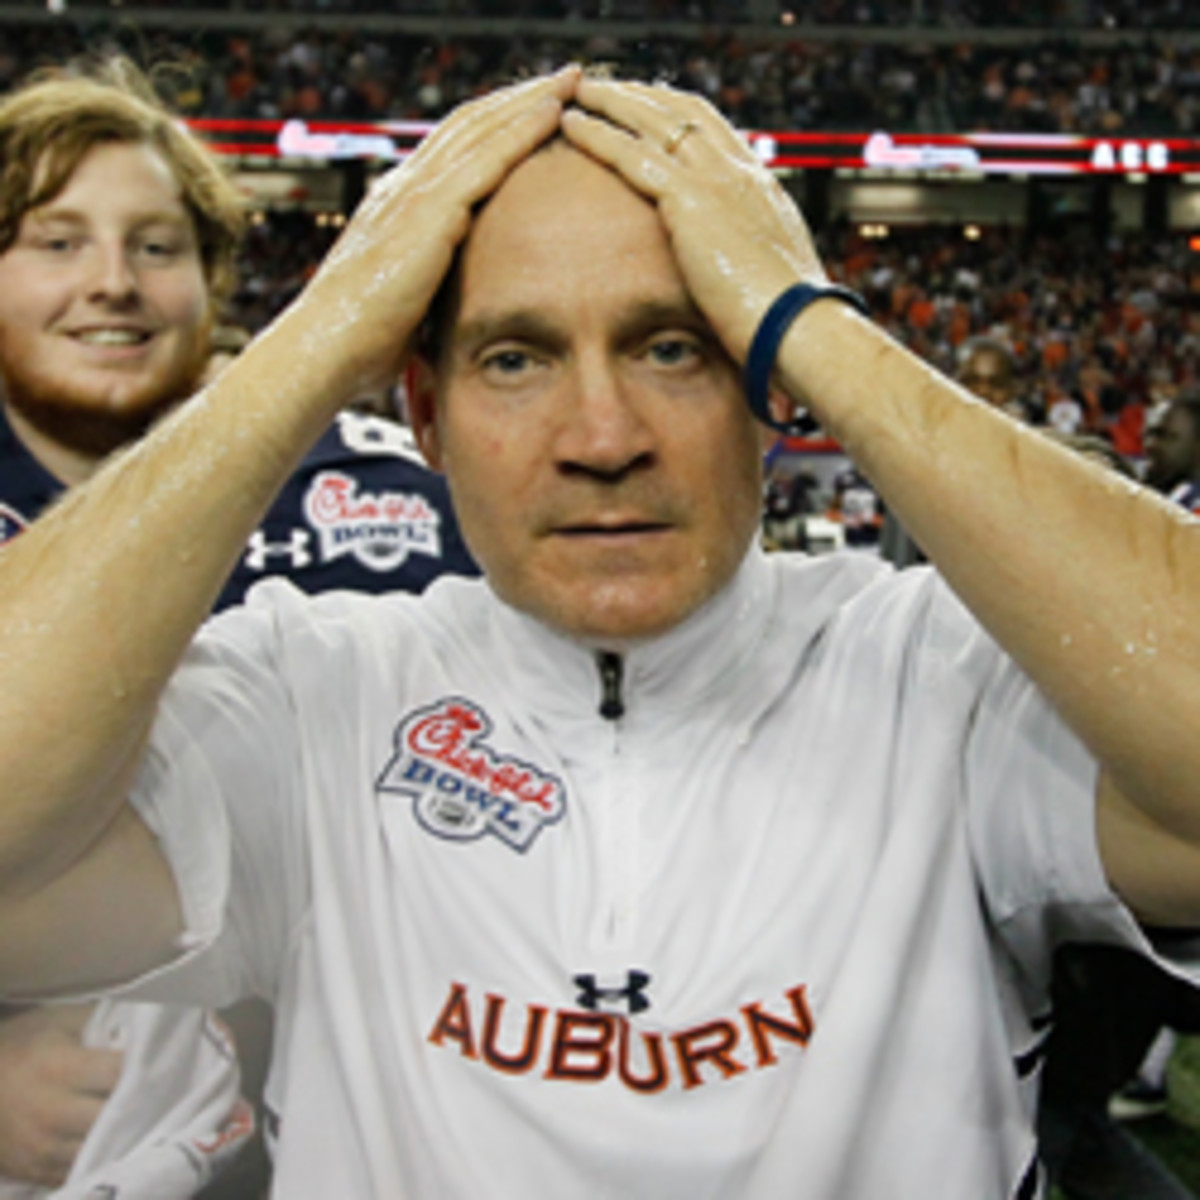 Former Auburn players are saying NCAA violations were committed under former coach Gene Chizik's watch. (Kevin C. Cox/Getty Images)